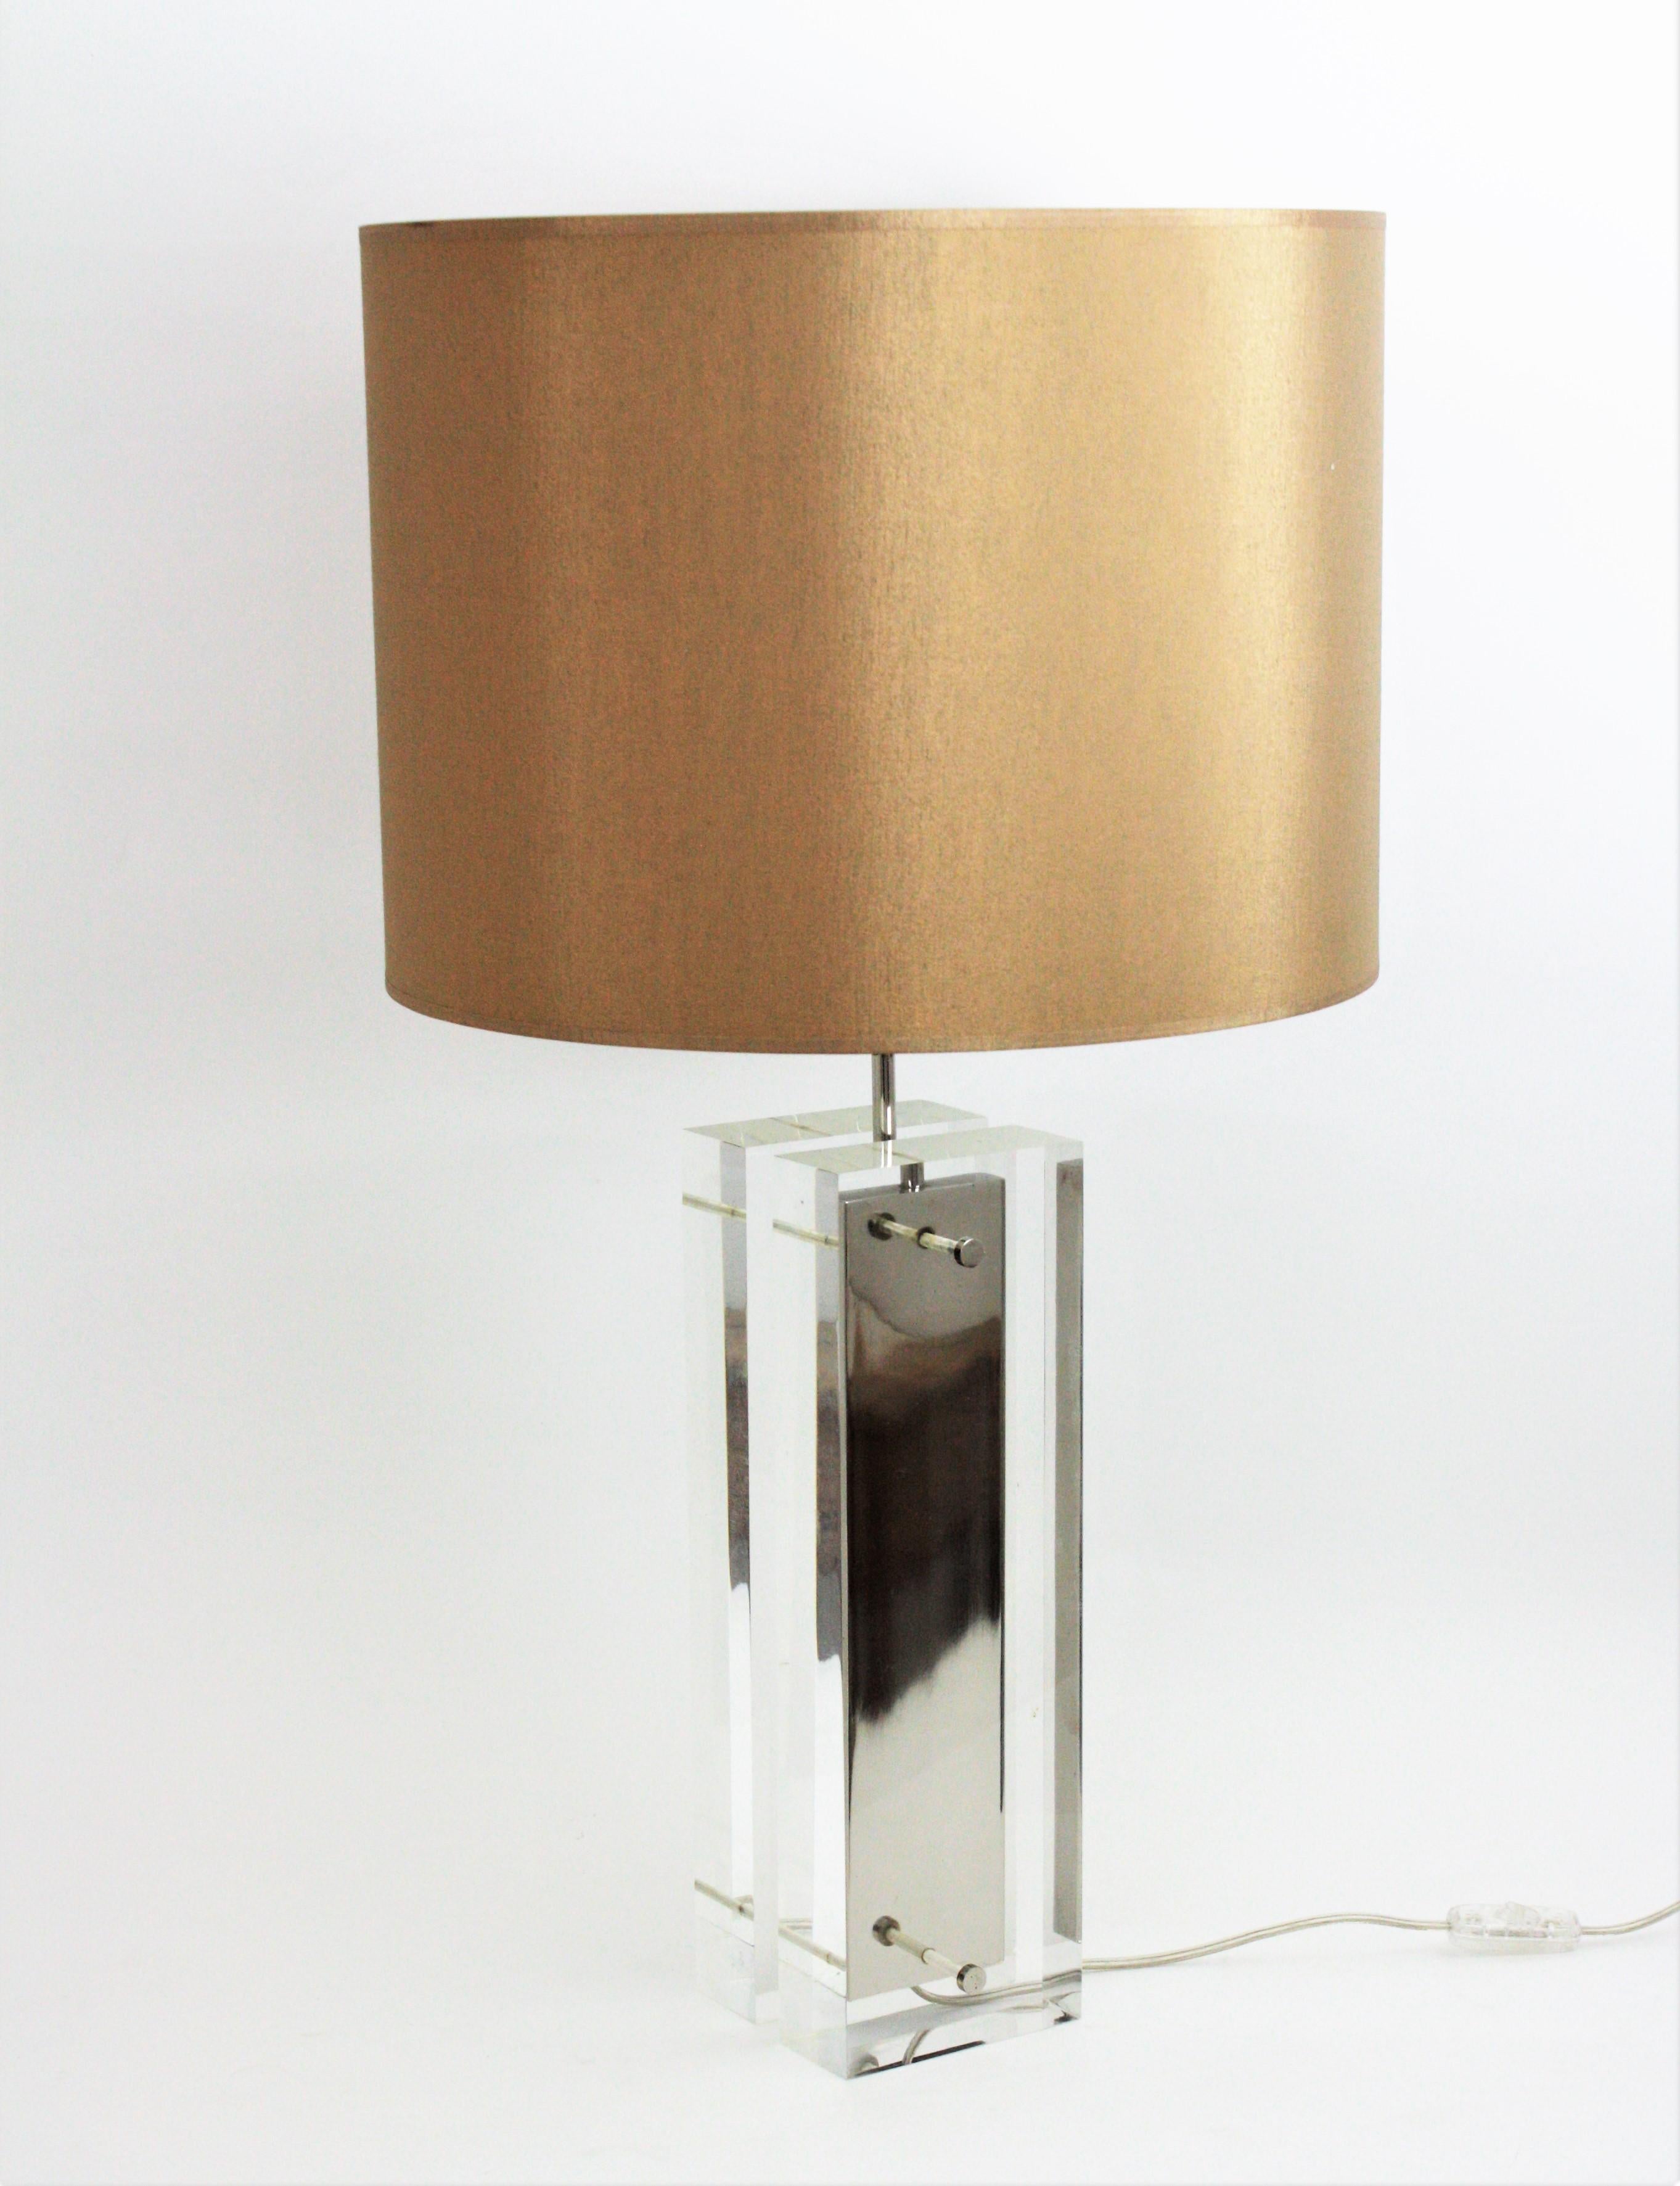 Charles Hollis Jones Lucite and Chromed Steel Midcentury Table Lamp For Sale 6